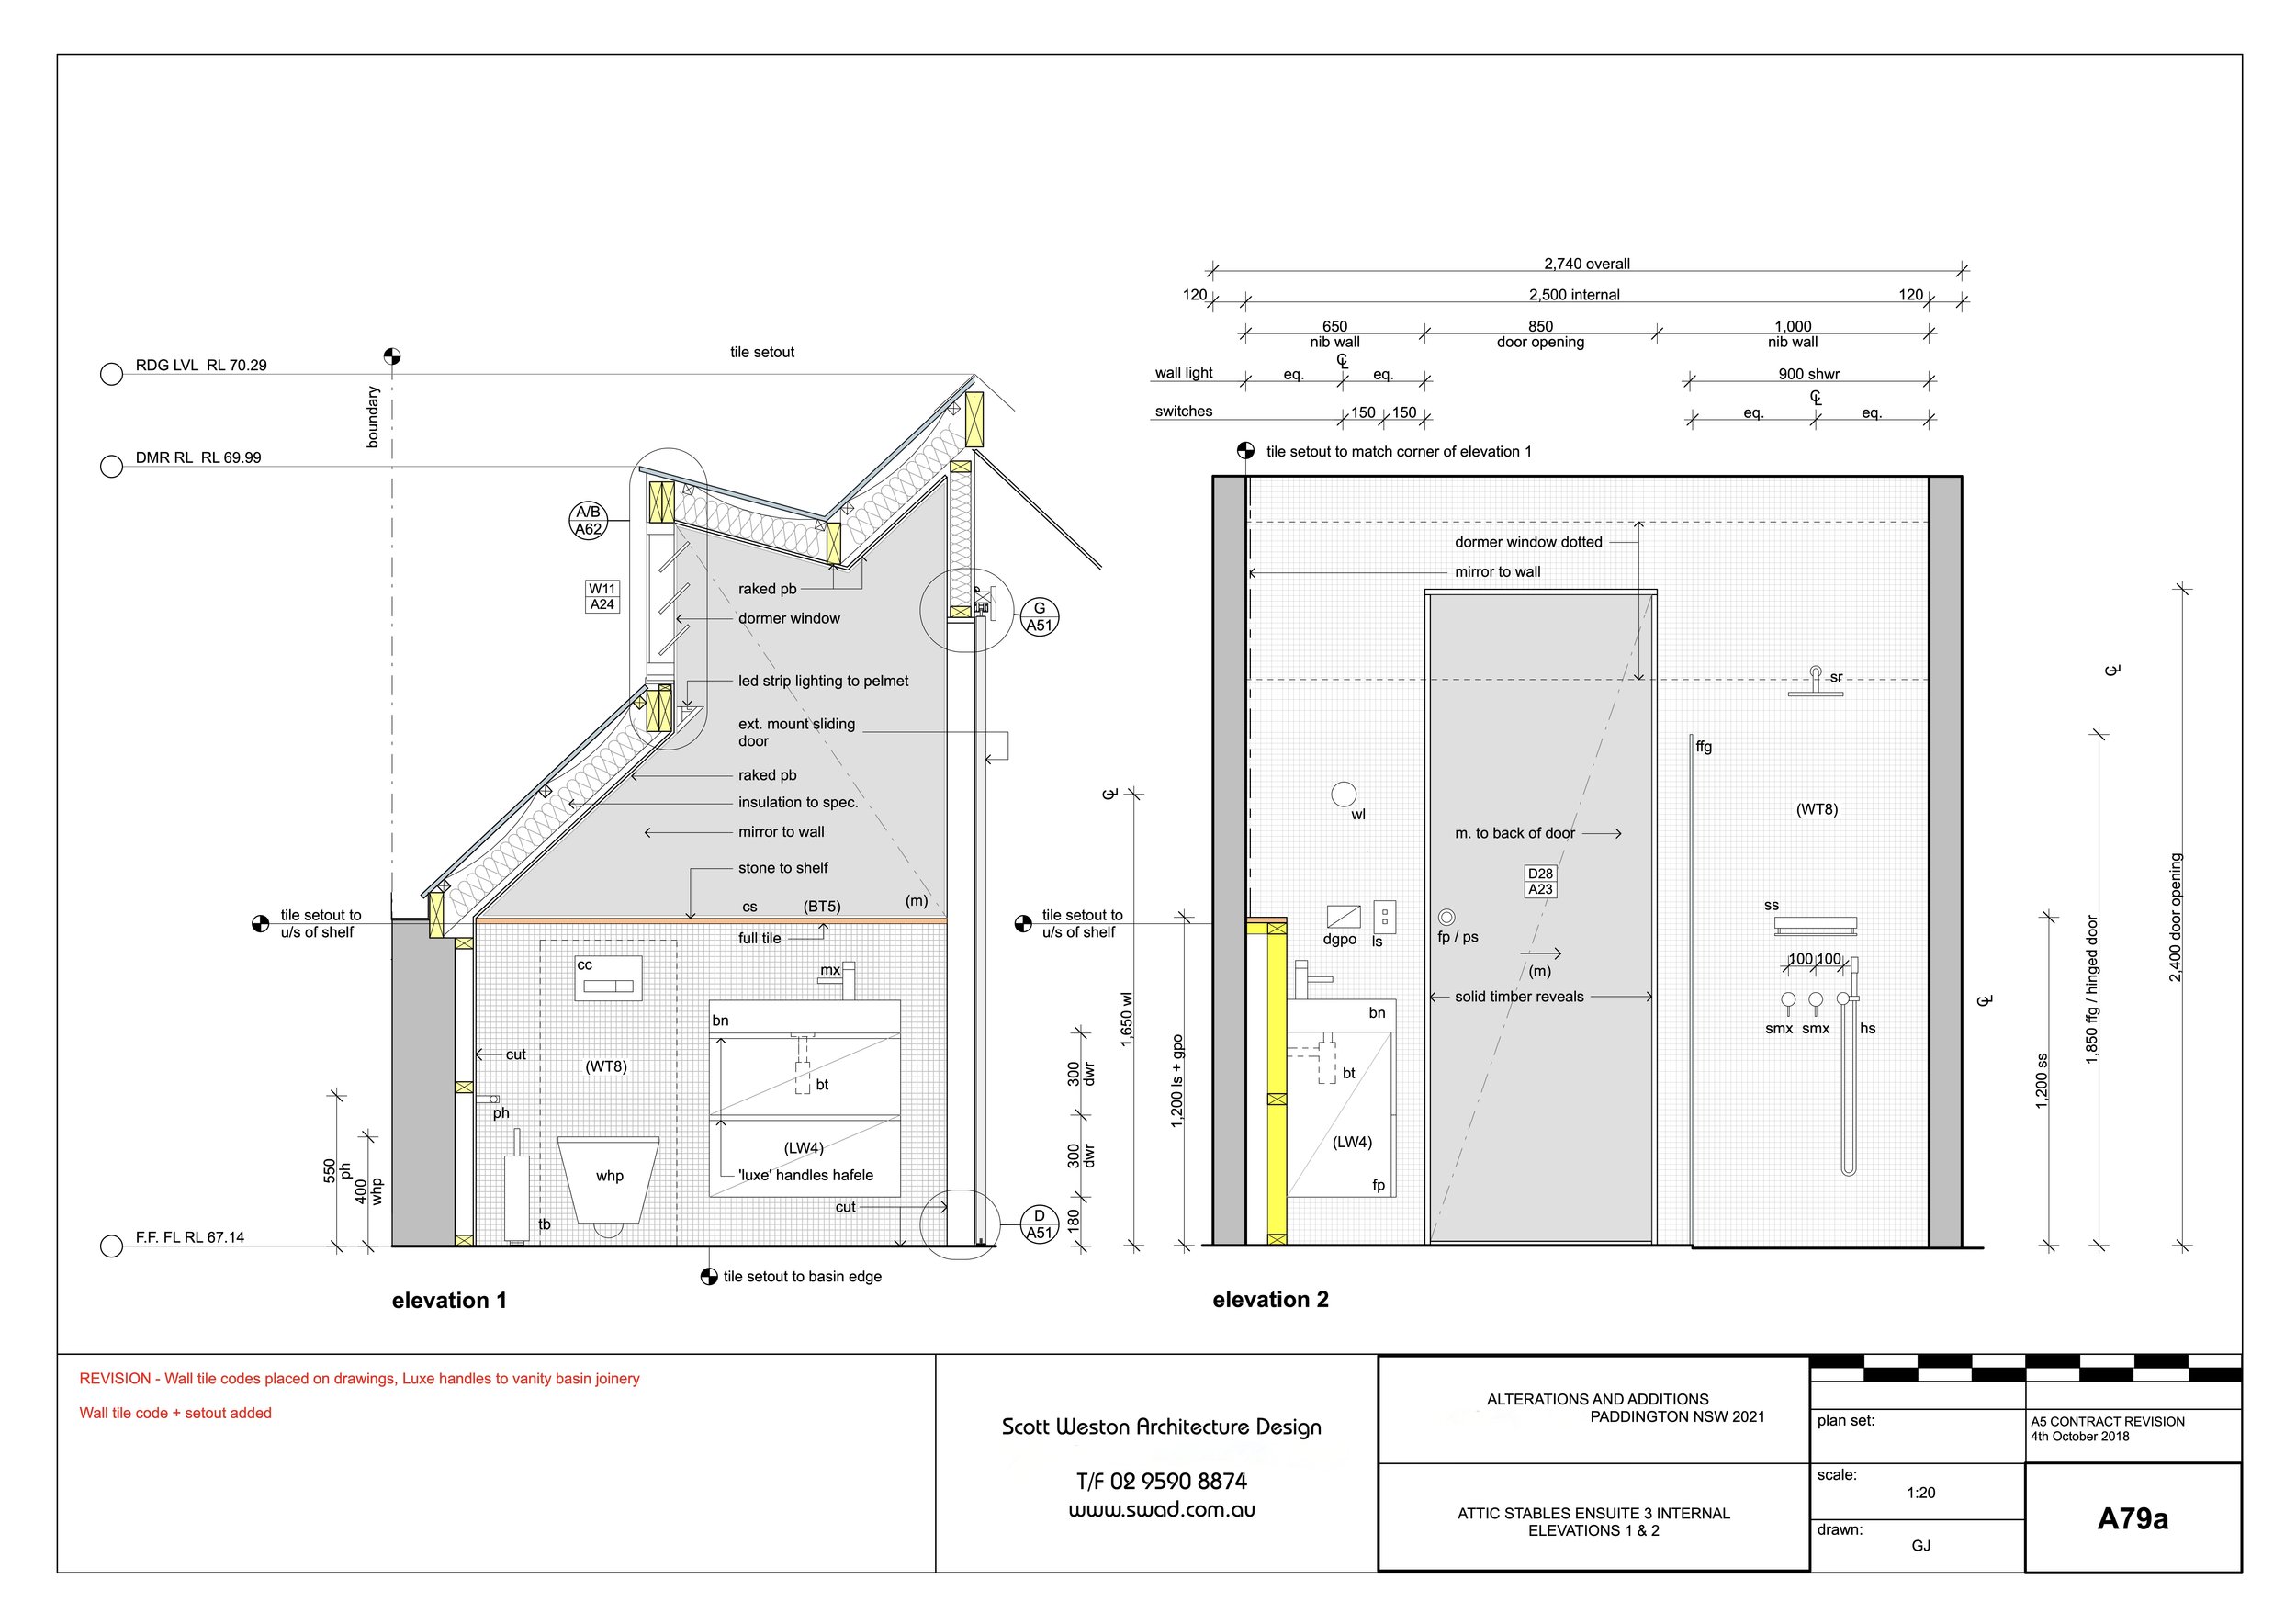 A79a ATTIC STABLES ENSUITE 3 INTERNAL ELEVATIONS 1 & 2 2.jpg